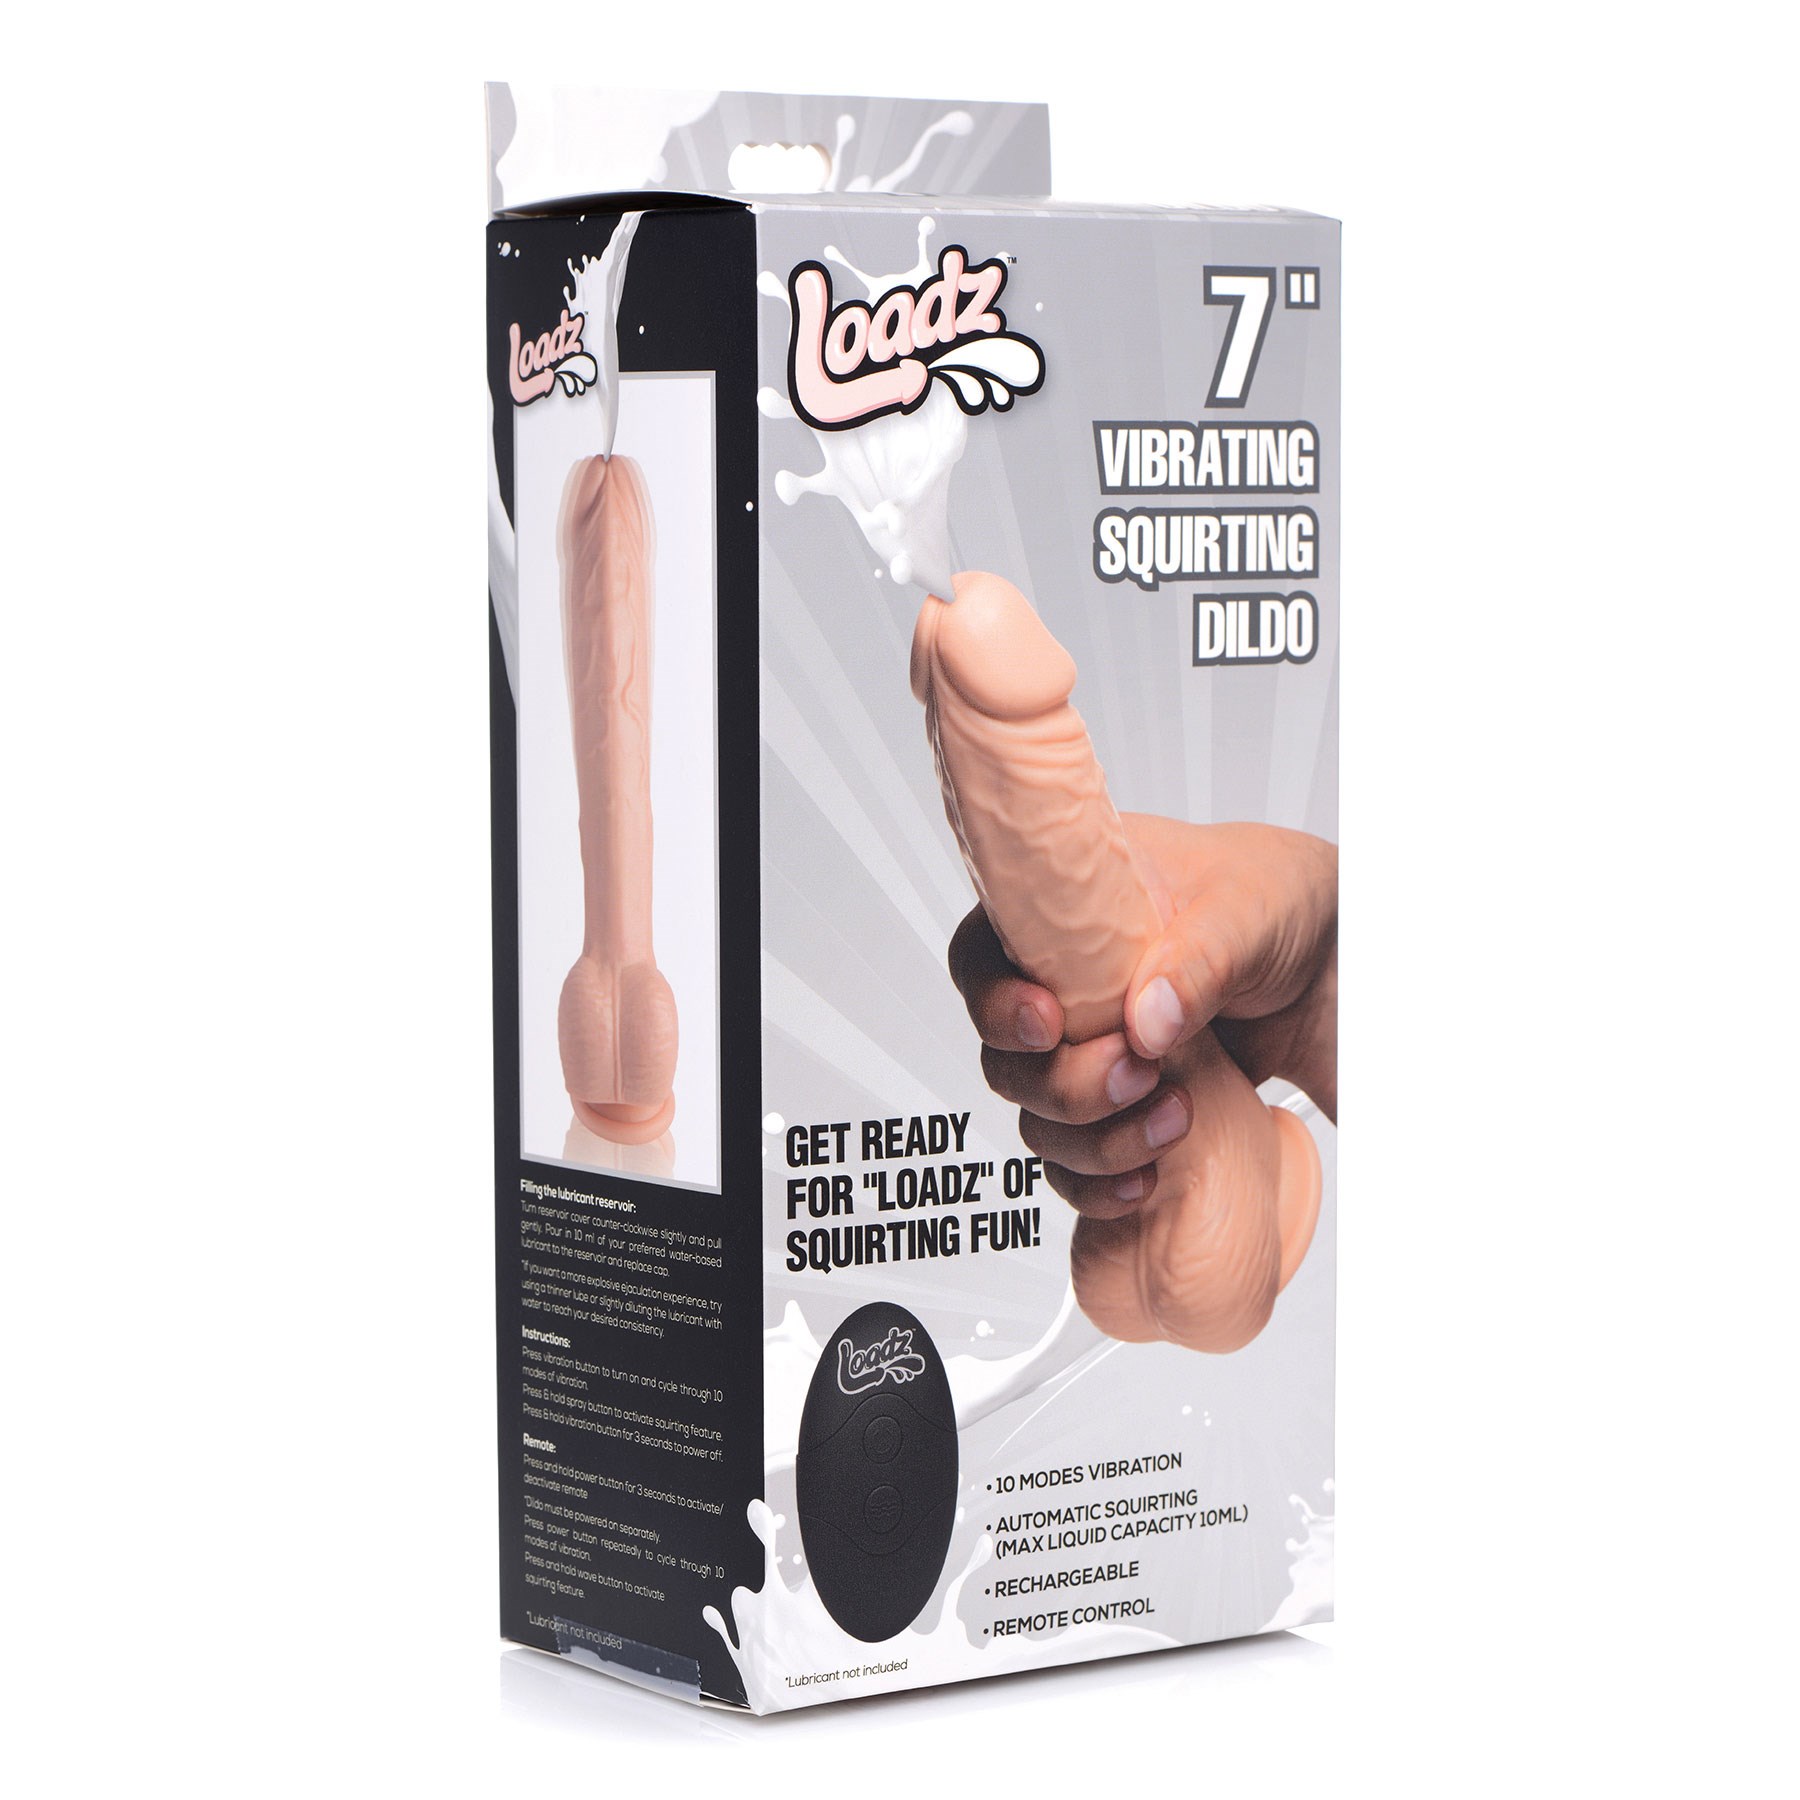 Loadz Vibrating Squirting Dildo white version front of box